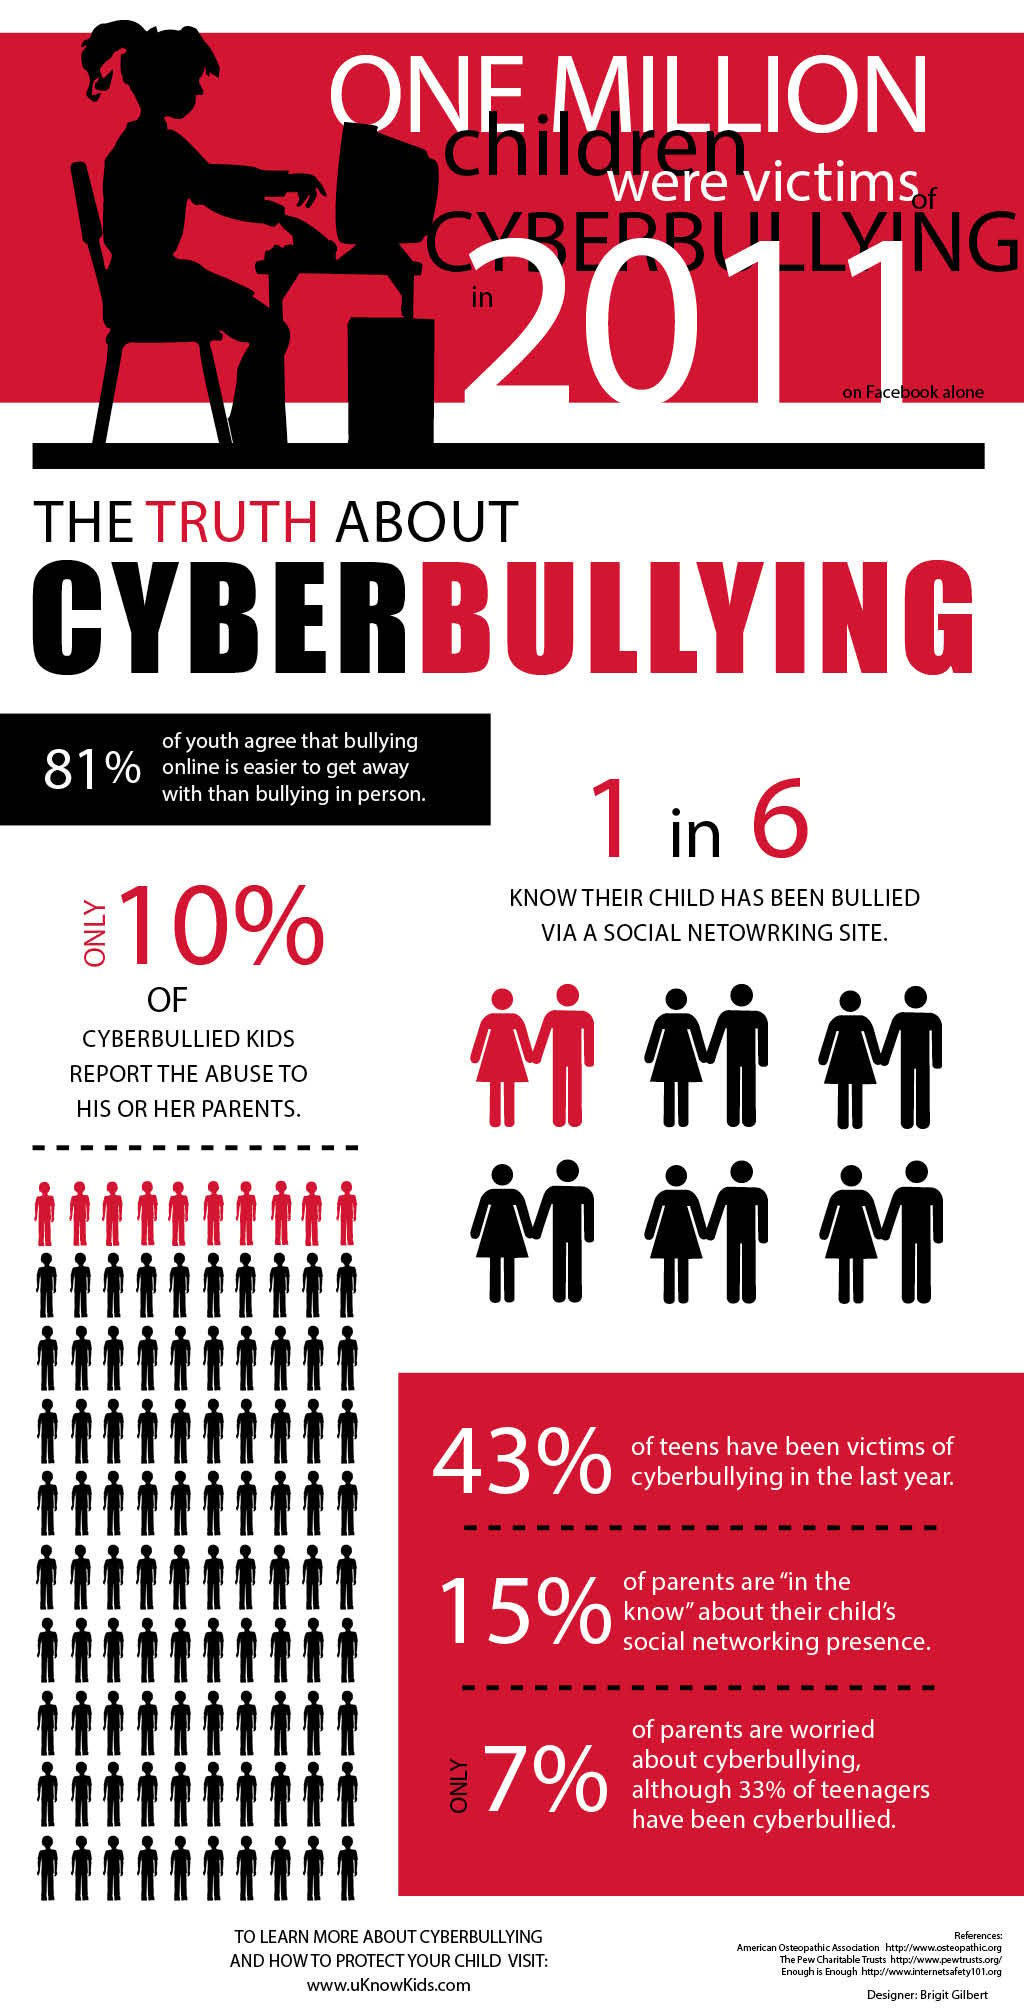 research and discuss a case of cyberbullying